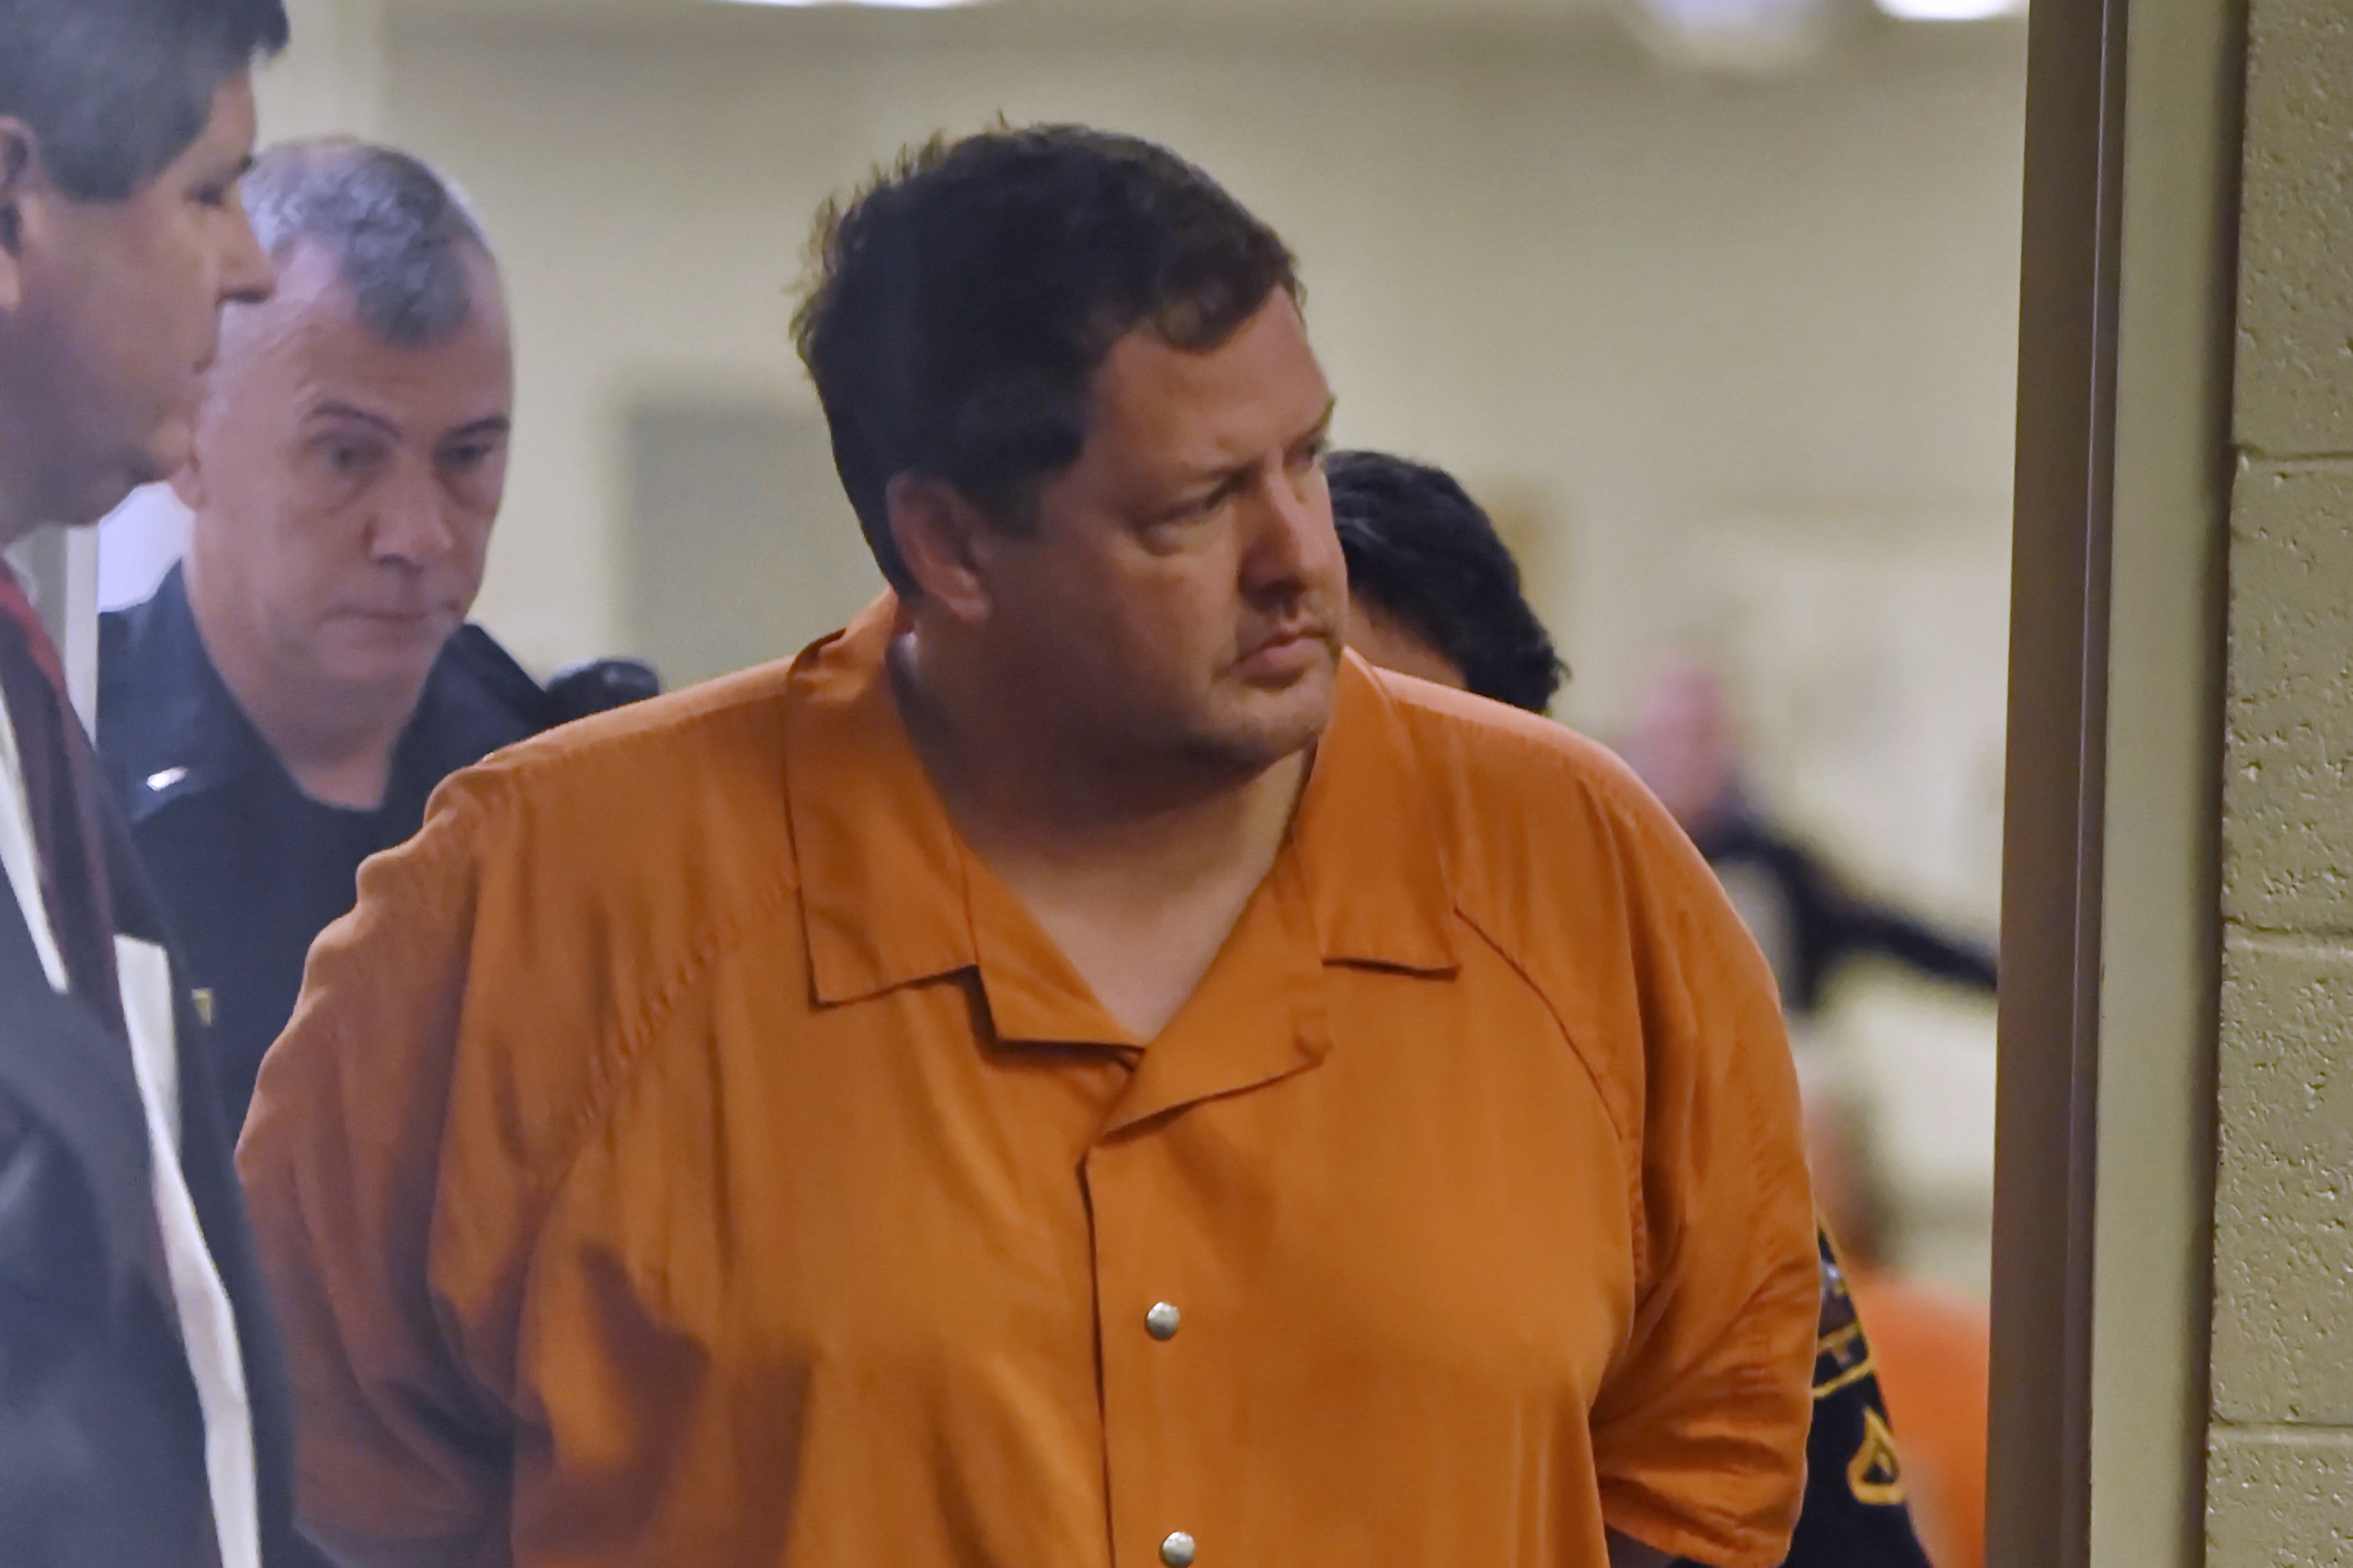 Todd Kohlhepp's enters the courtroom of Judge Jimmy Henson for a bond hearing at the Spartanburg Detention Facility, in Spartanburg, S.C. on, Nov. 6, 2016. (Richard Shiro—AP)